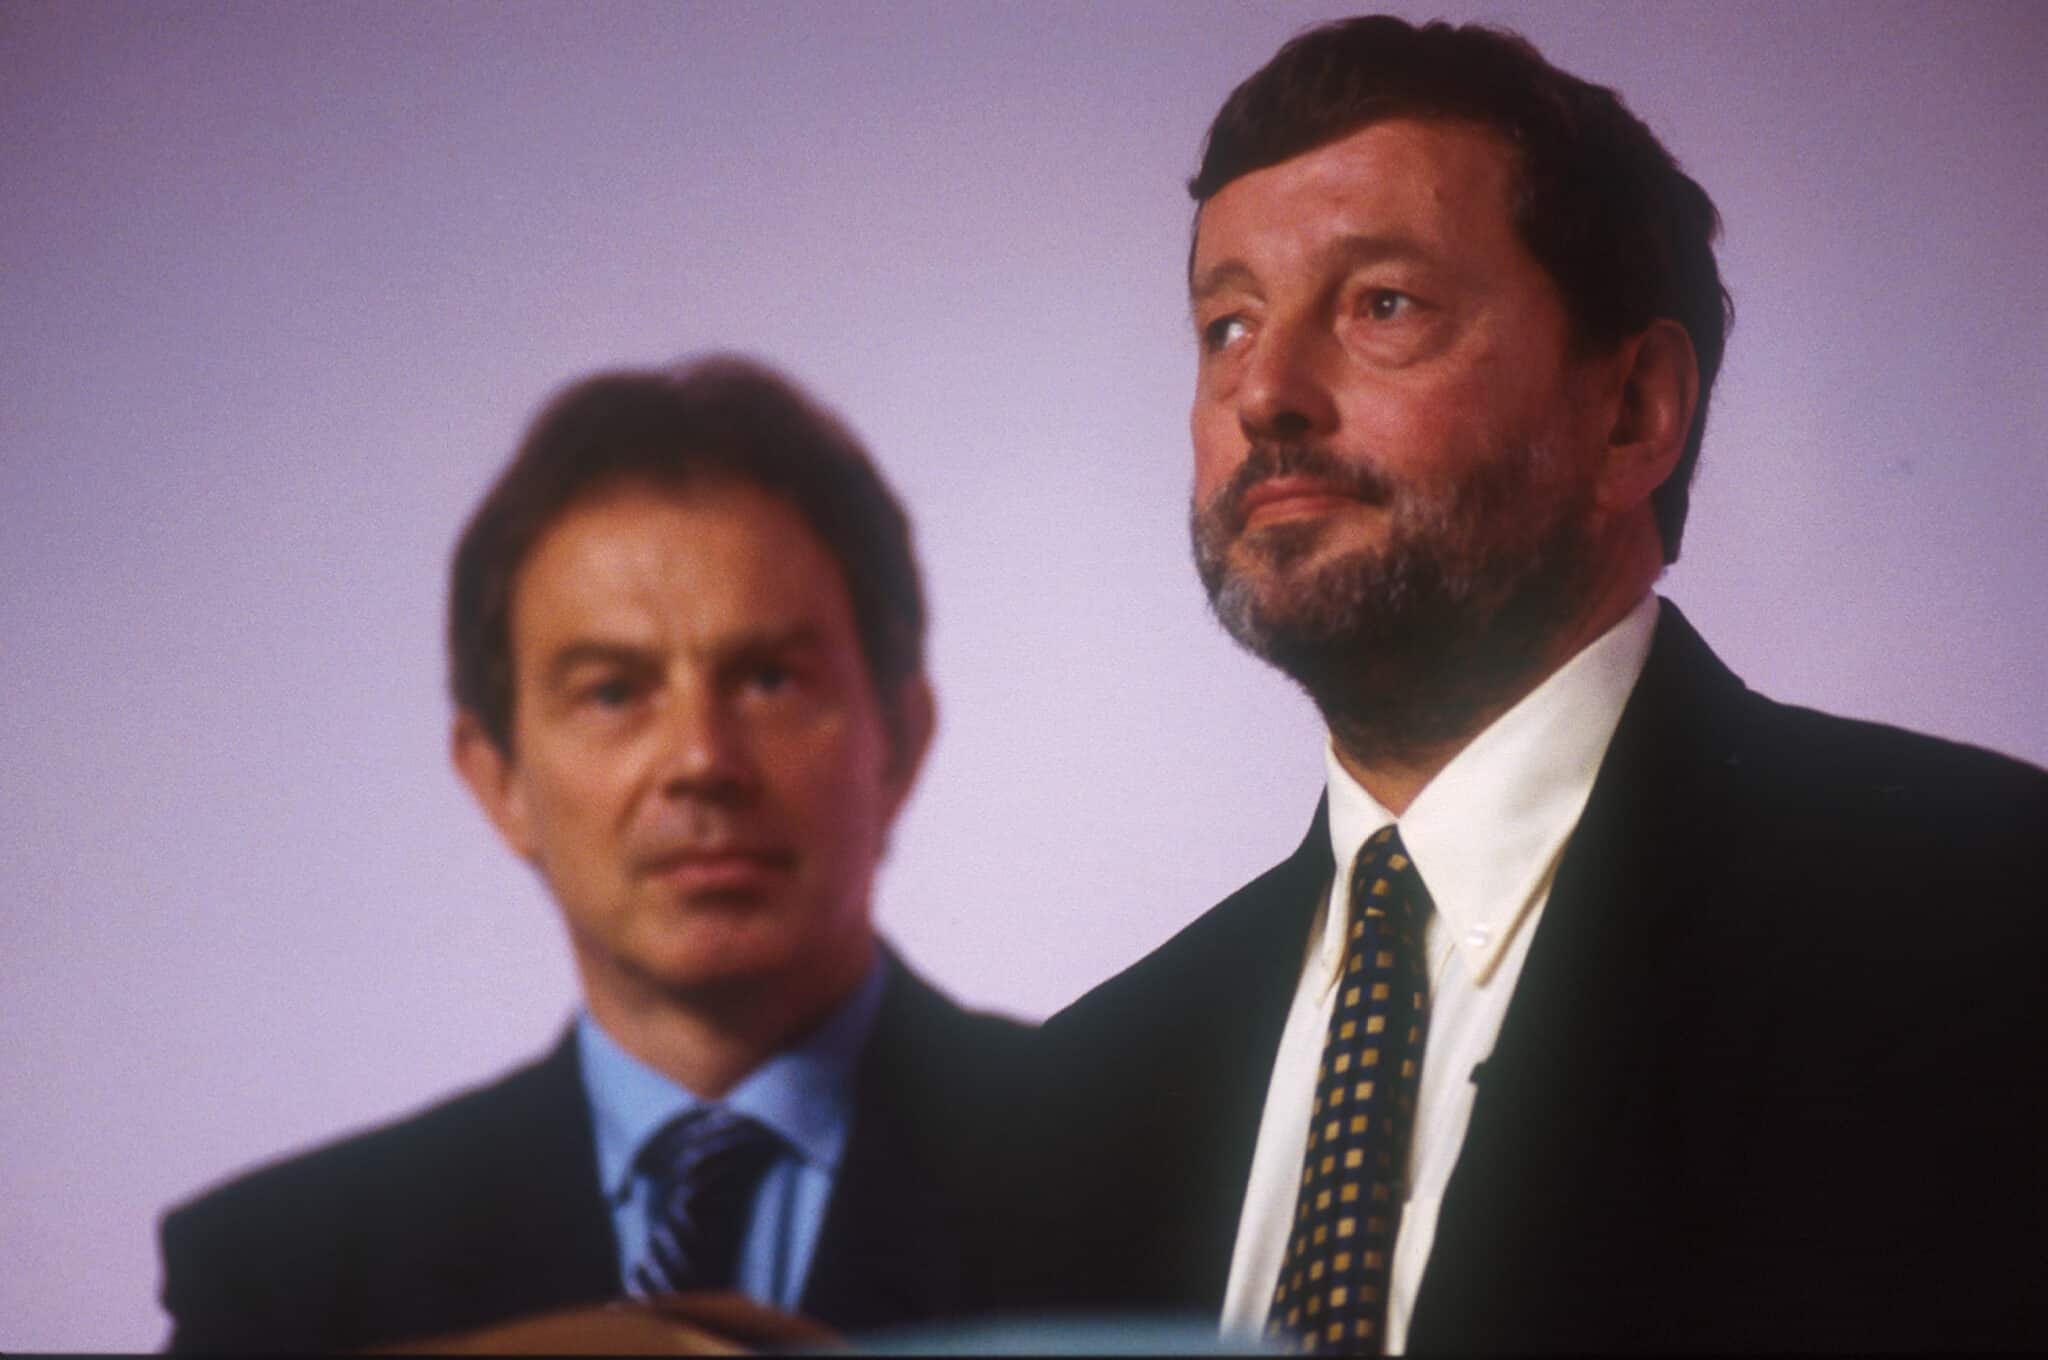 Tony Blair and David Blunkett at the Labour Party Conference 2000. 